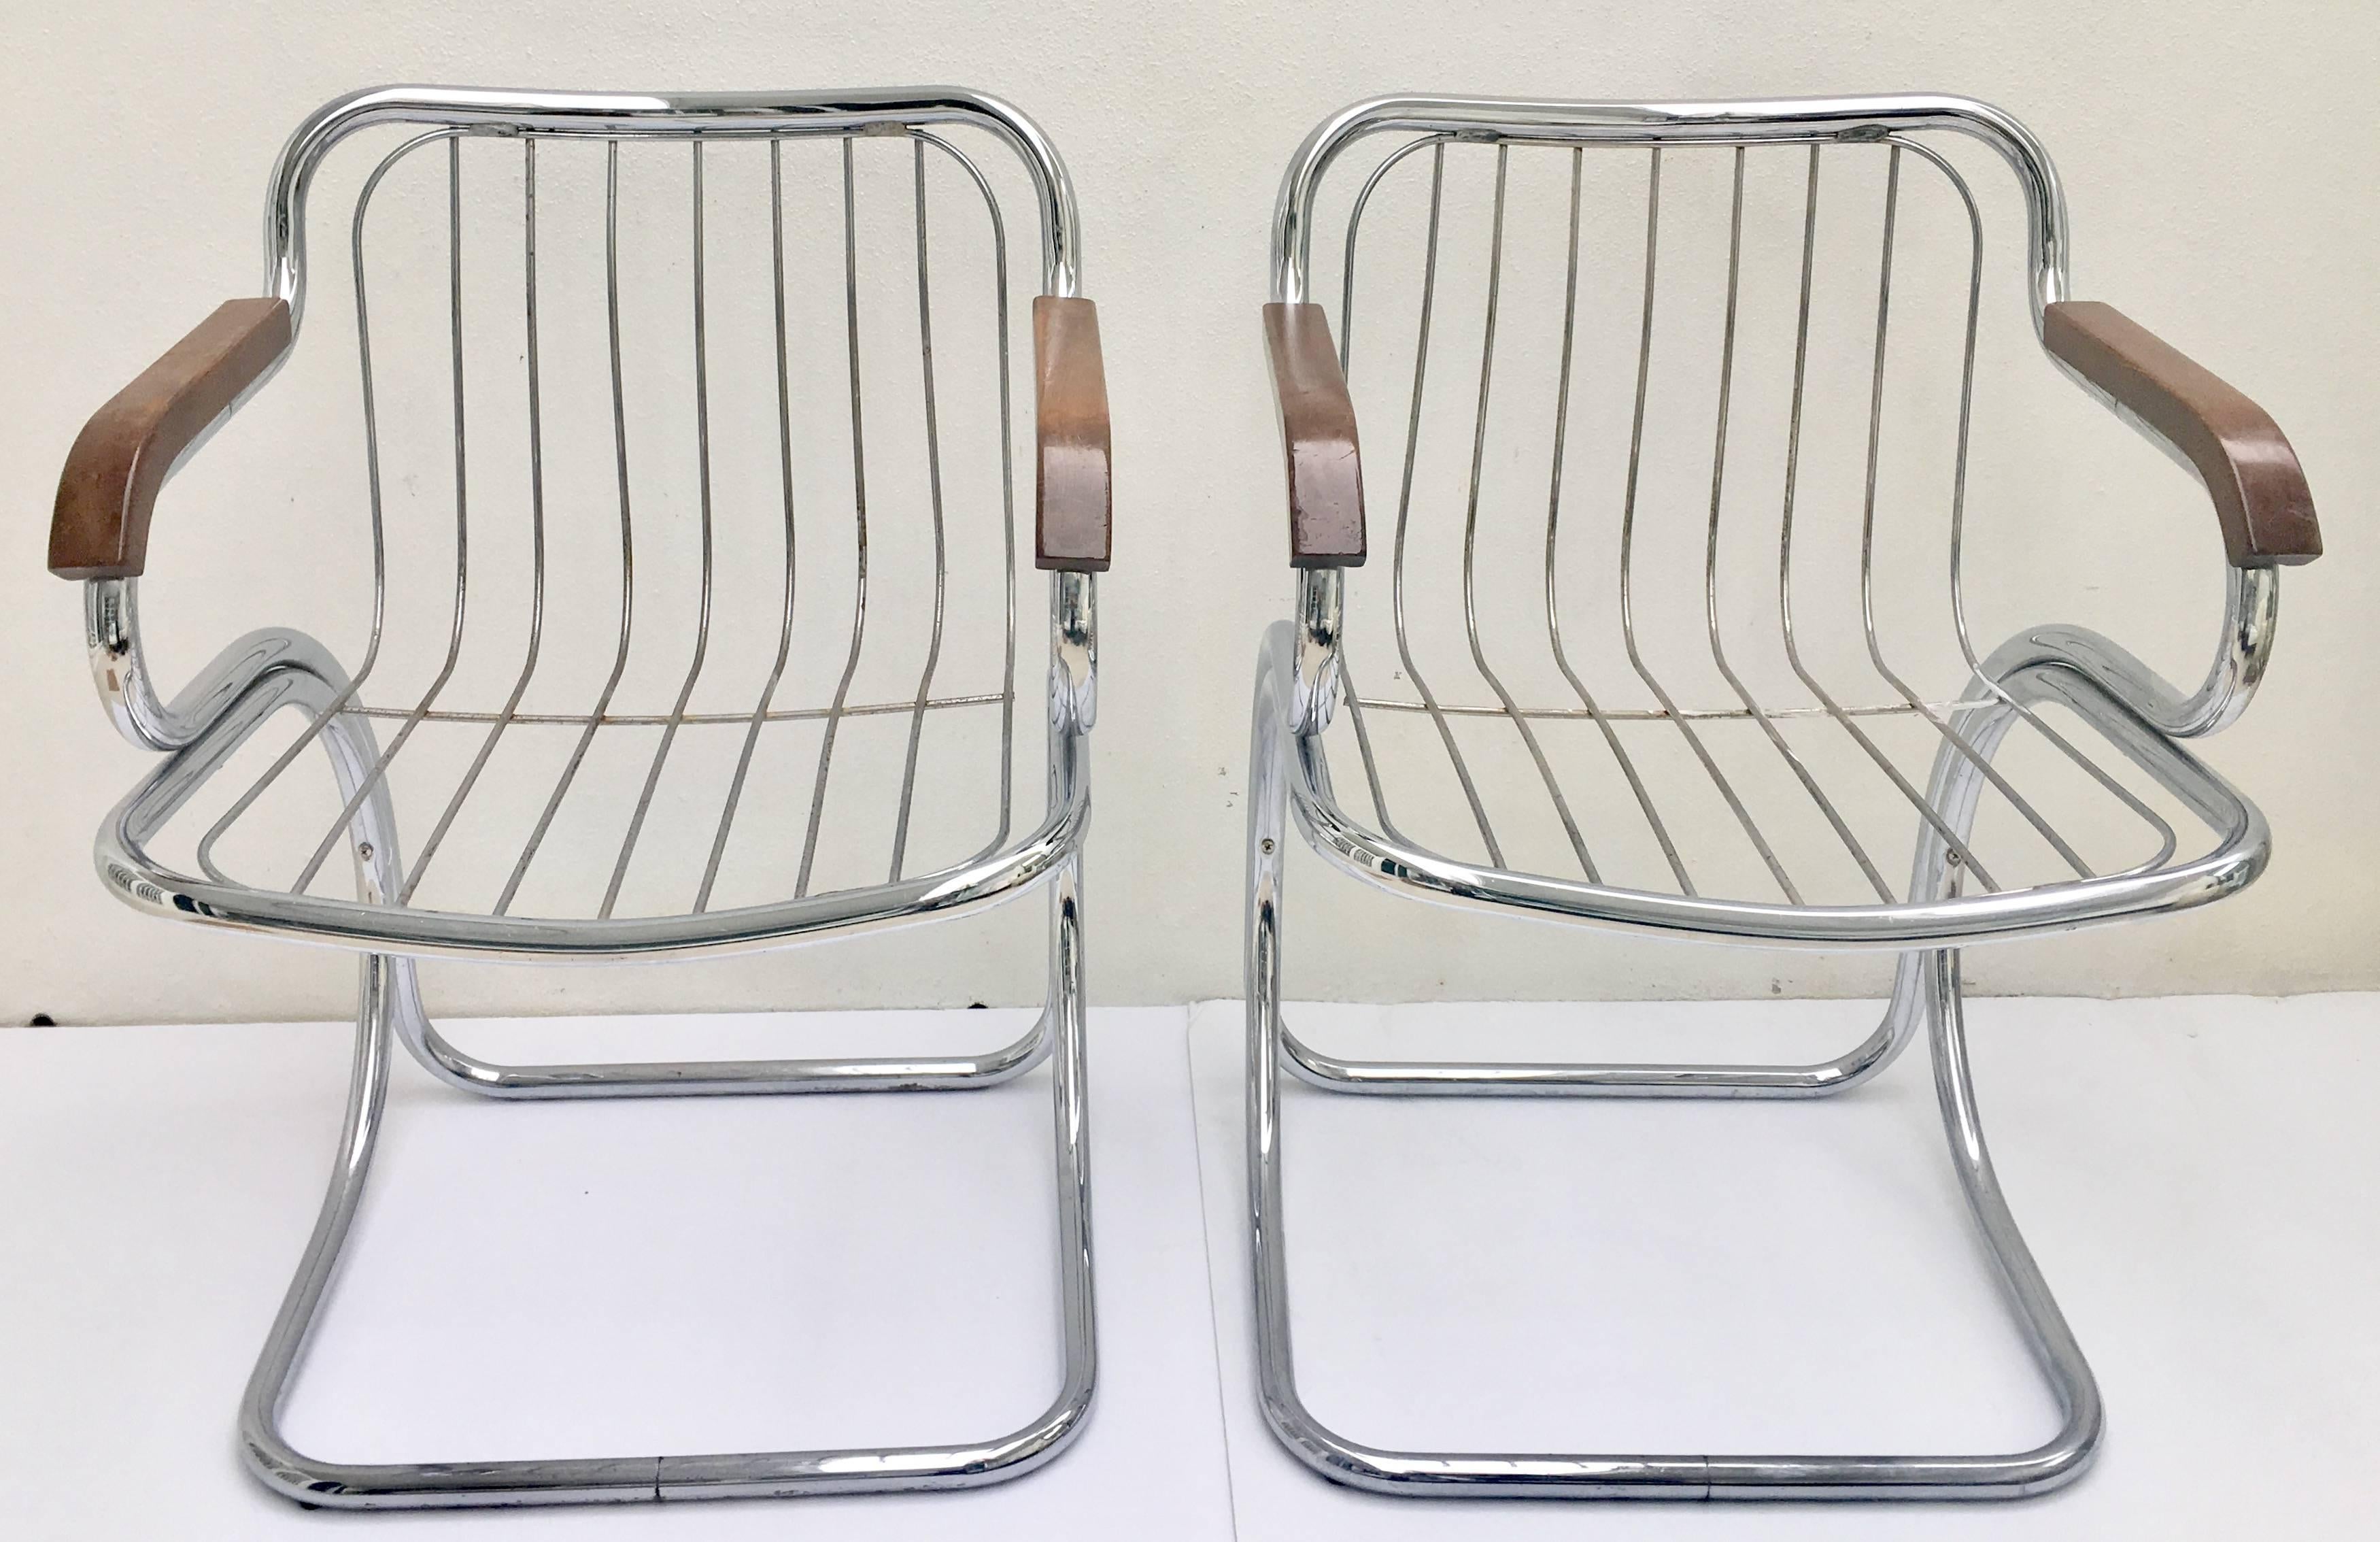 Pair of Mid-Century Modern Italian chrome and wood armchairs in the style of Gastone Rinaldi. Chairs are chrome wire cantilever in shape with wire back and seat and thick bentwood arm rests.